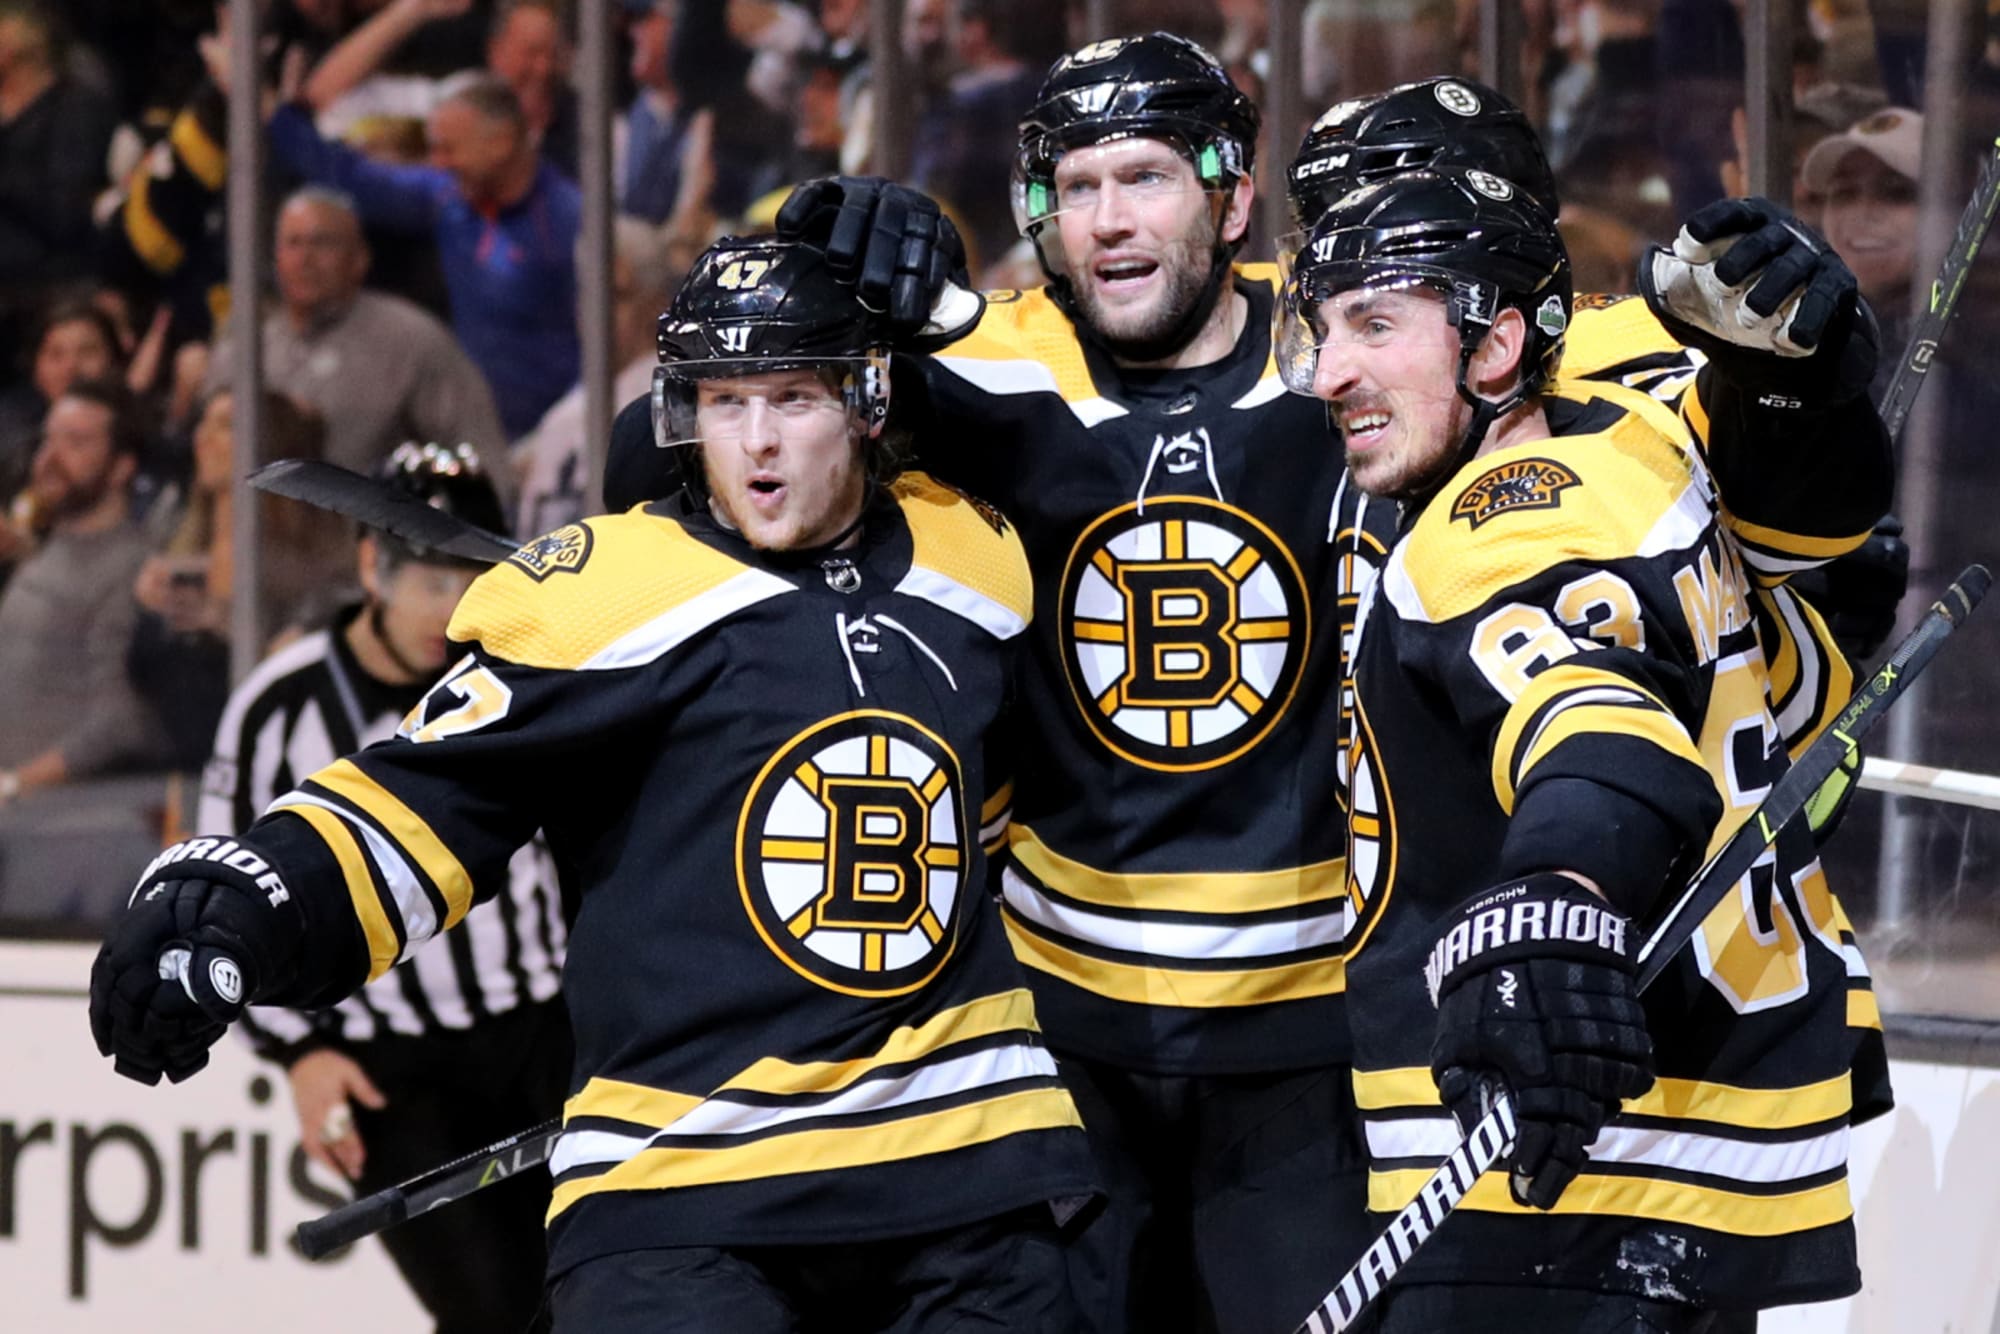 Bruins vs. Maple Leafs Game 7 Full highlights, final score and more